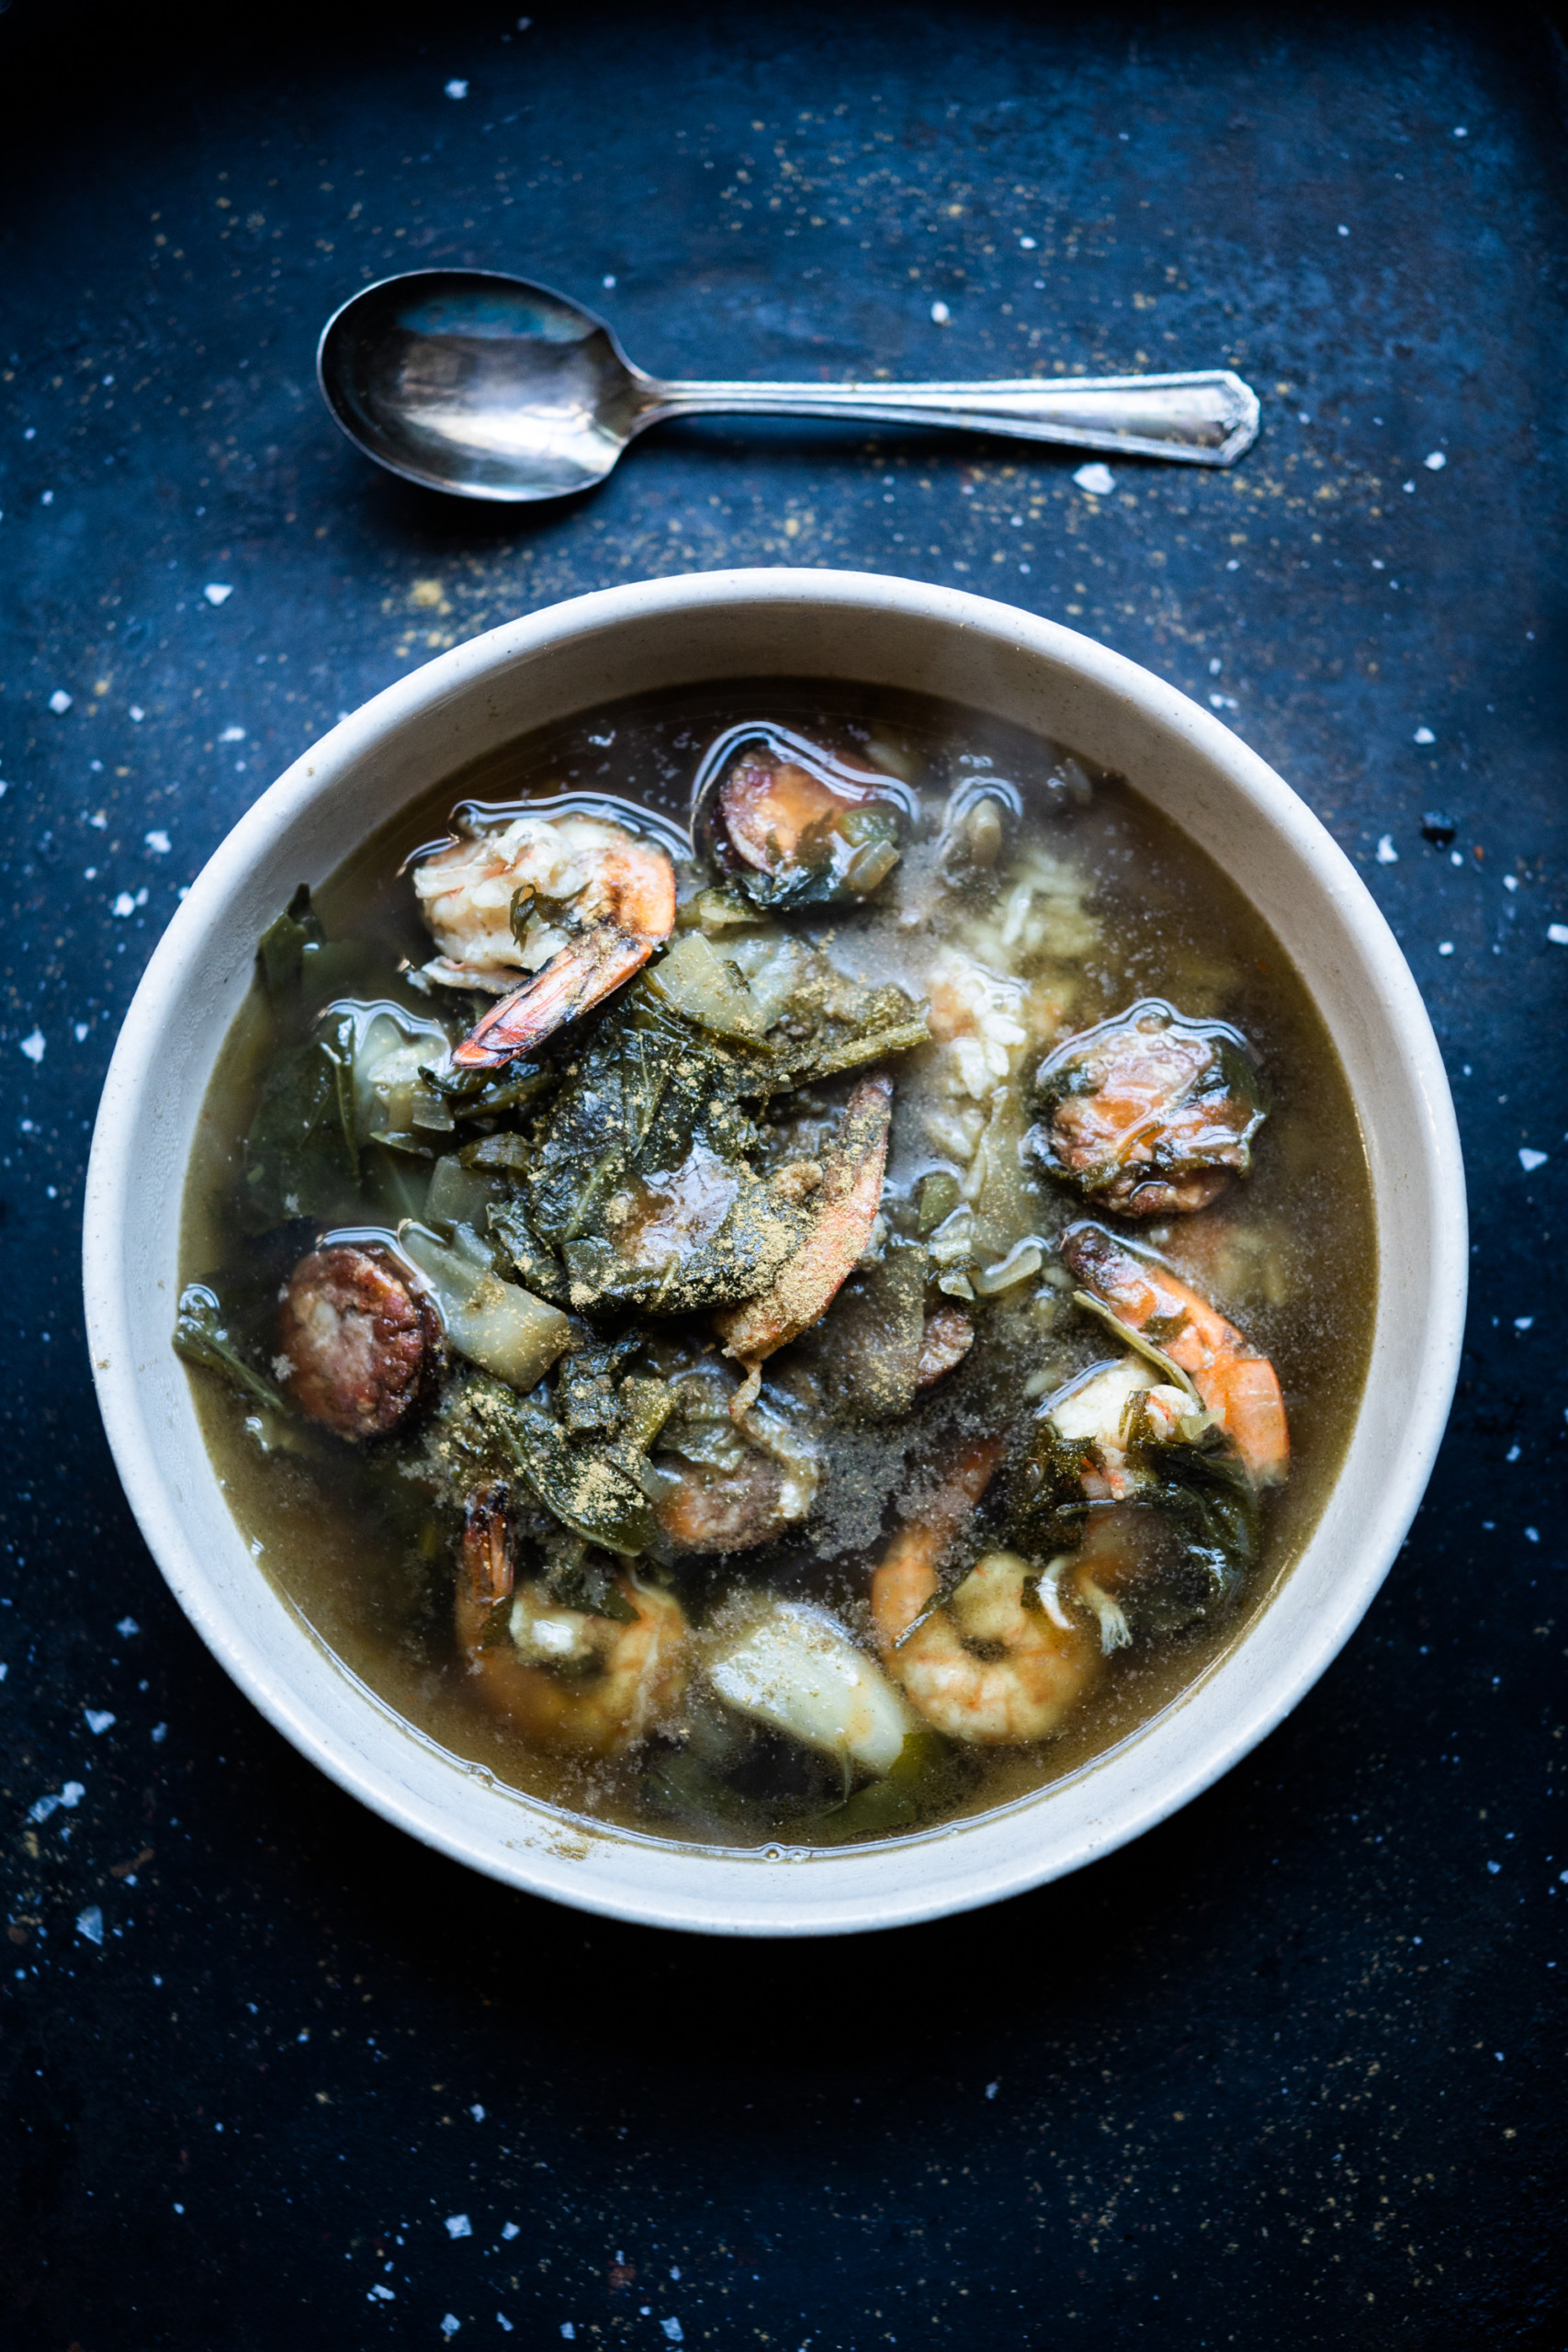 Gumbo z'herbes with a mix of greens, smoked duck sausage, and Louisiana shrimp